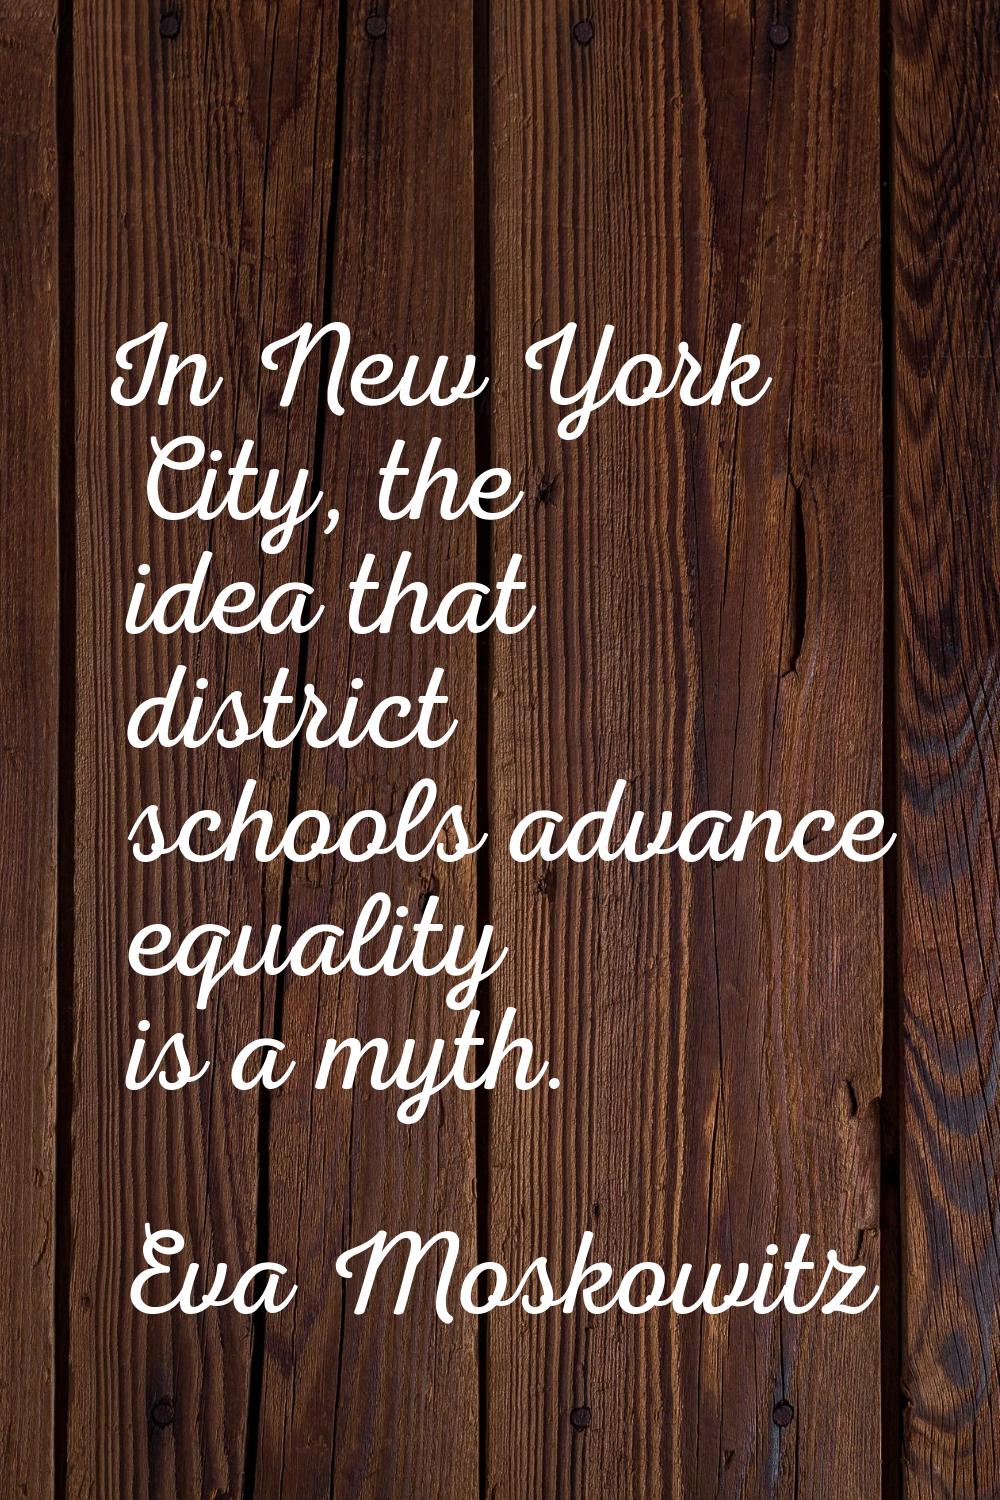 In New York City, the idea that district schools advance equality is a myth.